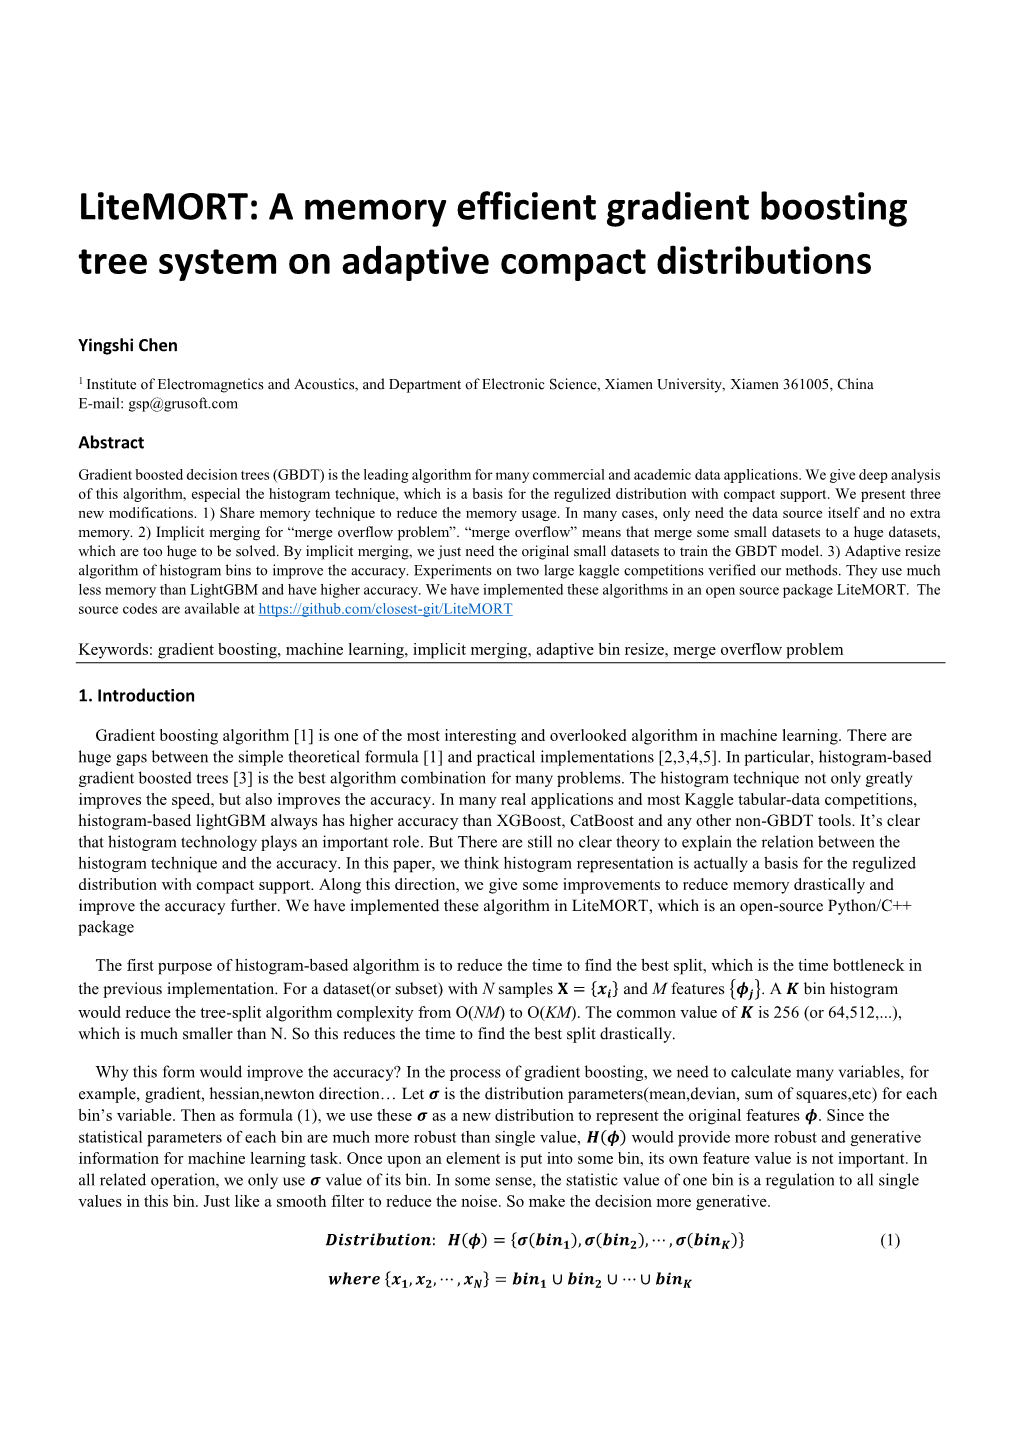 A Memory Efficient Gradient Boosting Tree System on Adaptive Compact Distributions